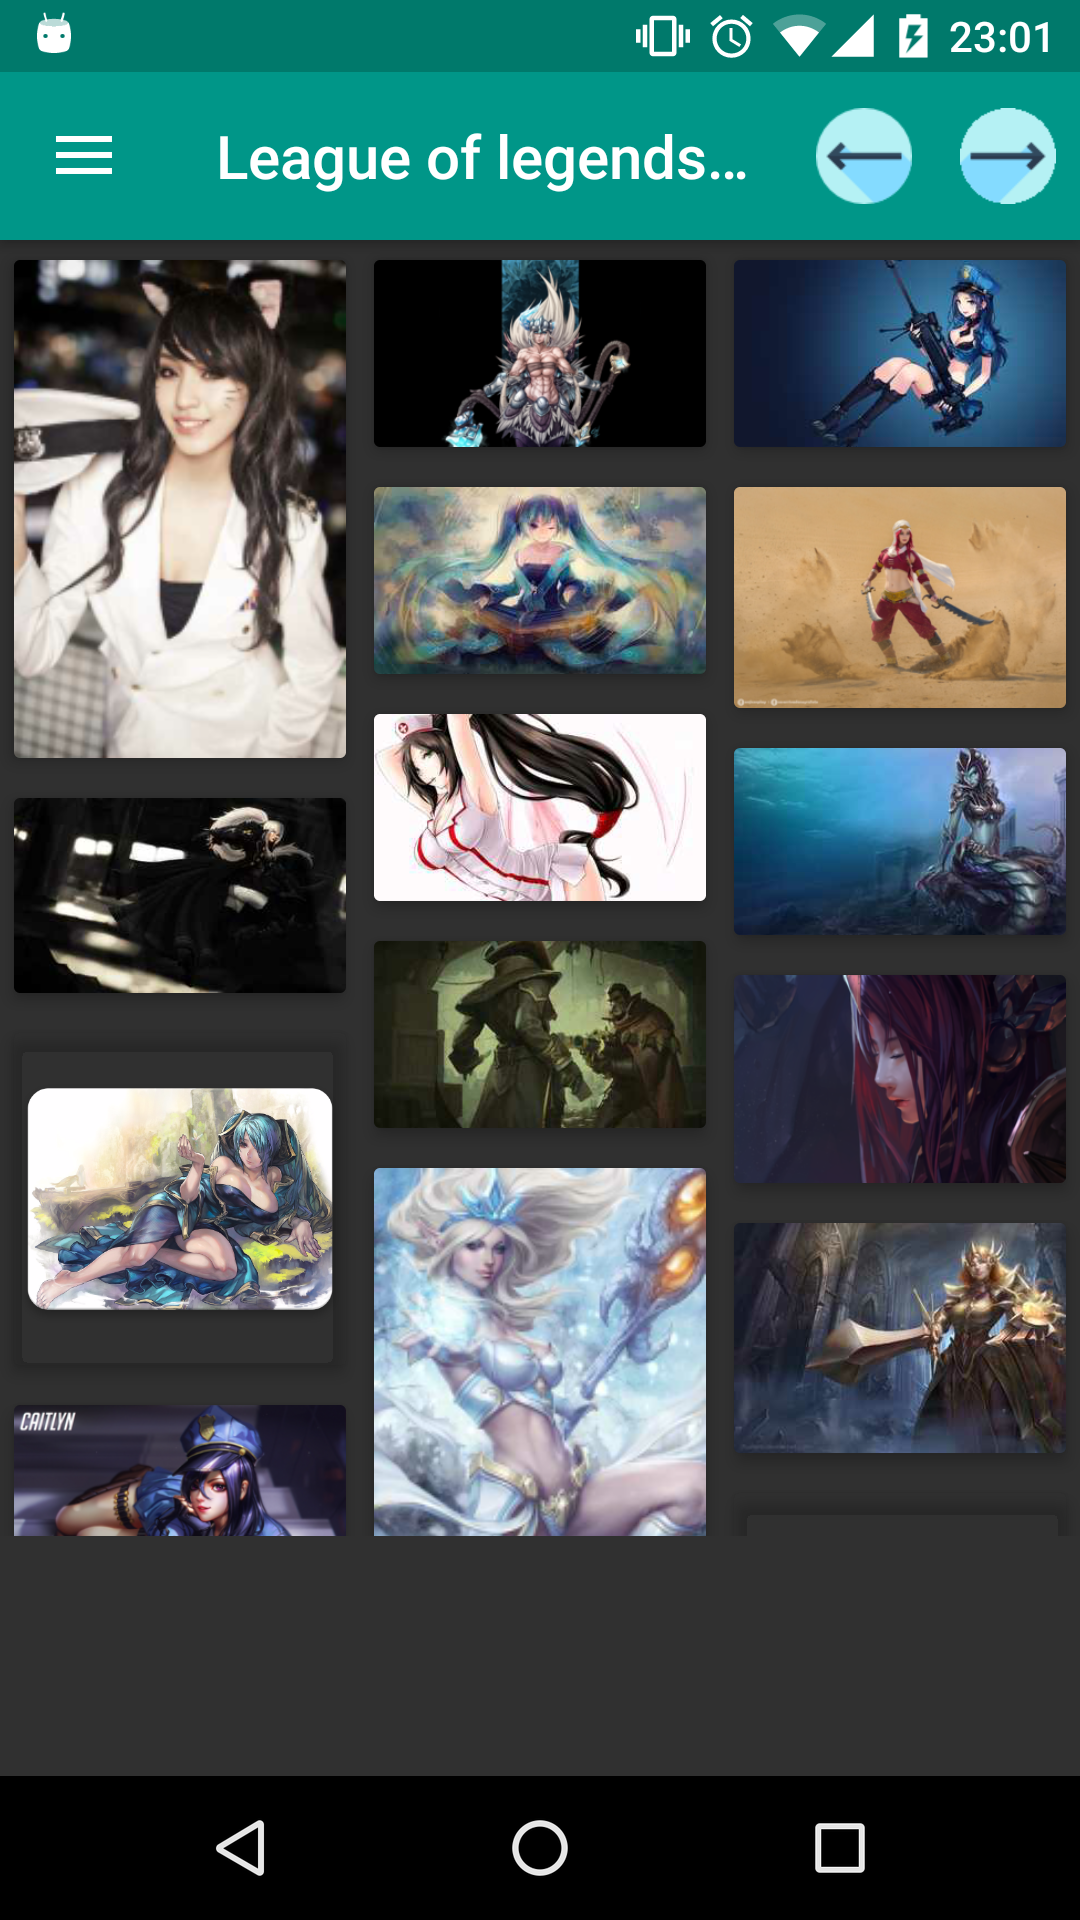 League of Legends wallpapers league,hot,legends,for,pictures,game,sexy,wallpaper,top,backgrounds,pics,wallpapers,apps,erotica,adult,phone,apk,puzzle,hentai,picw,app,henti,lily,porn,lane,download